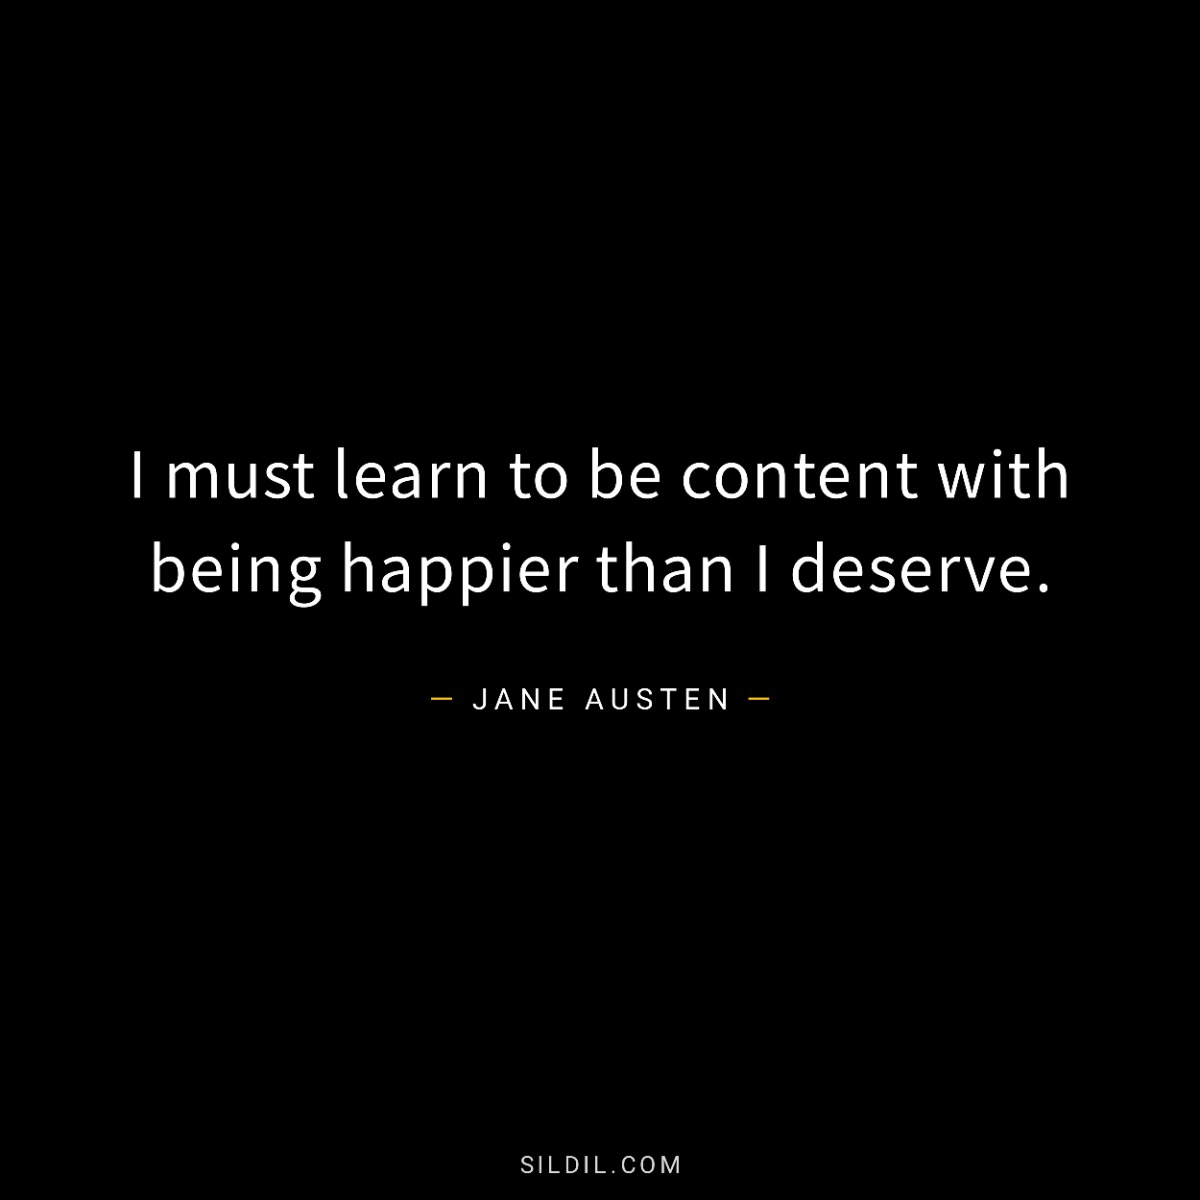 I must learn to be content with being happier than I deserve.